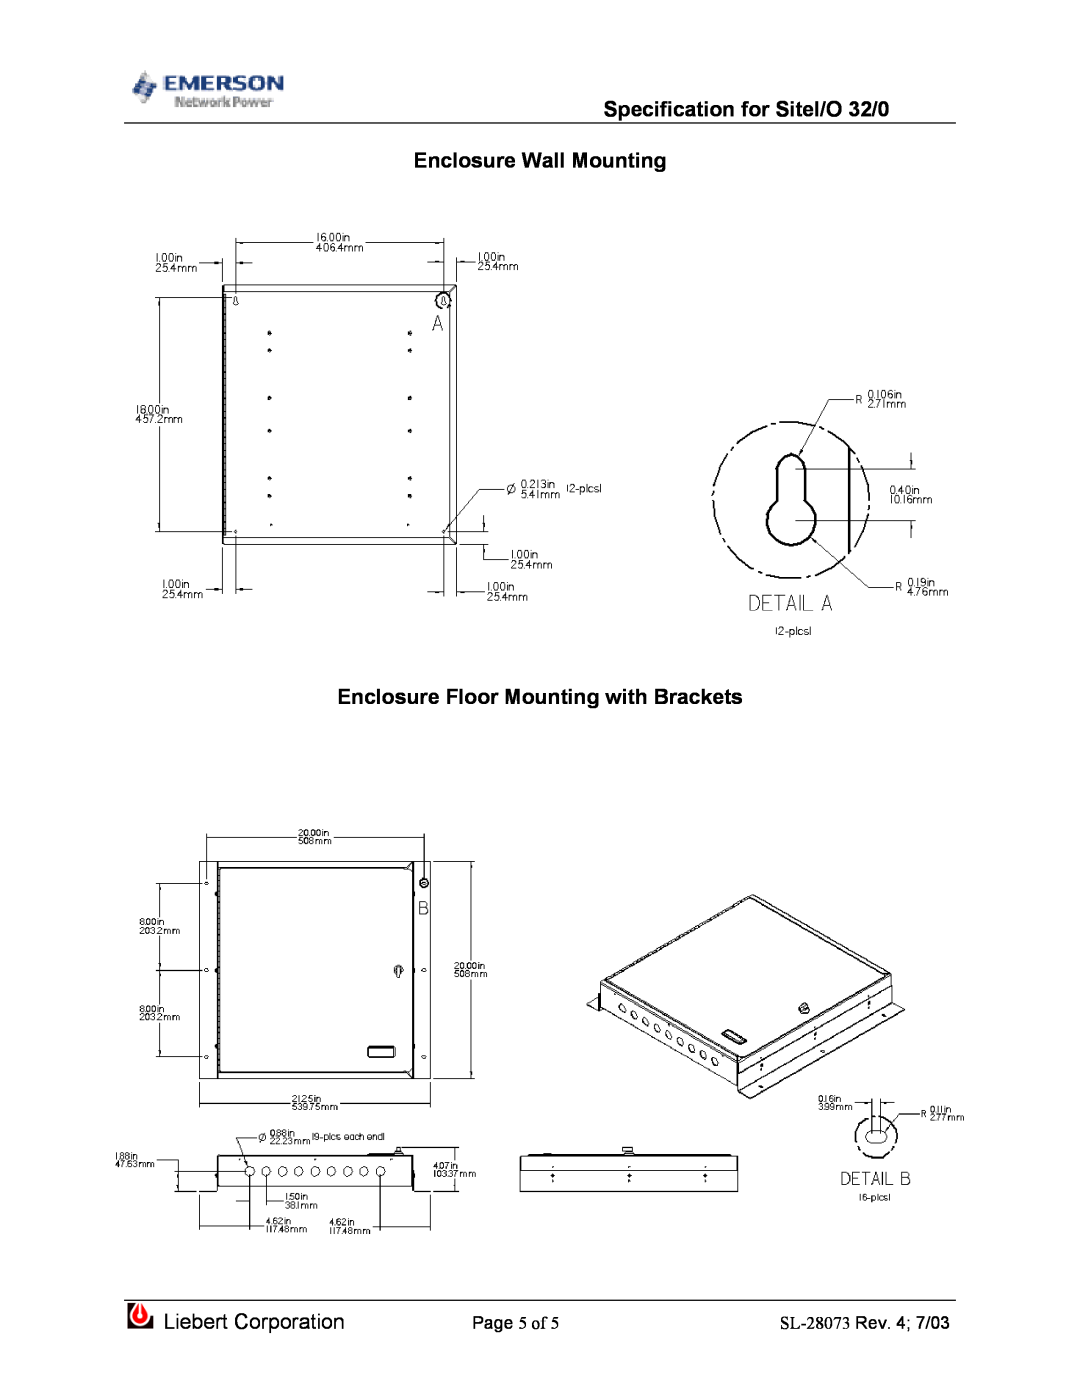 Emerson Specification for SiteI/O 32/0 Enclosure Wall Mounting, Enclosure Floor Mounting with Brackets, Page 5 of 